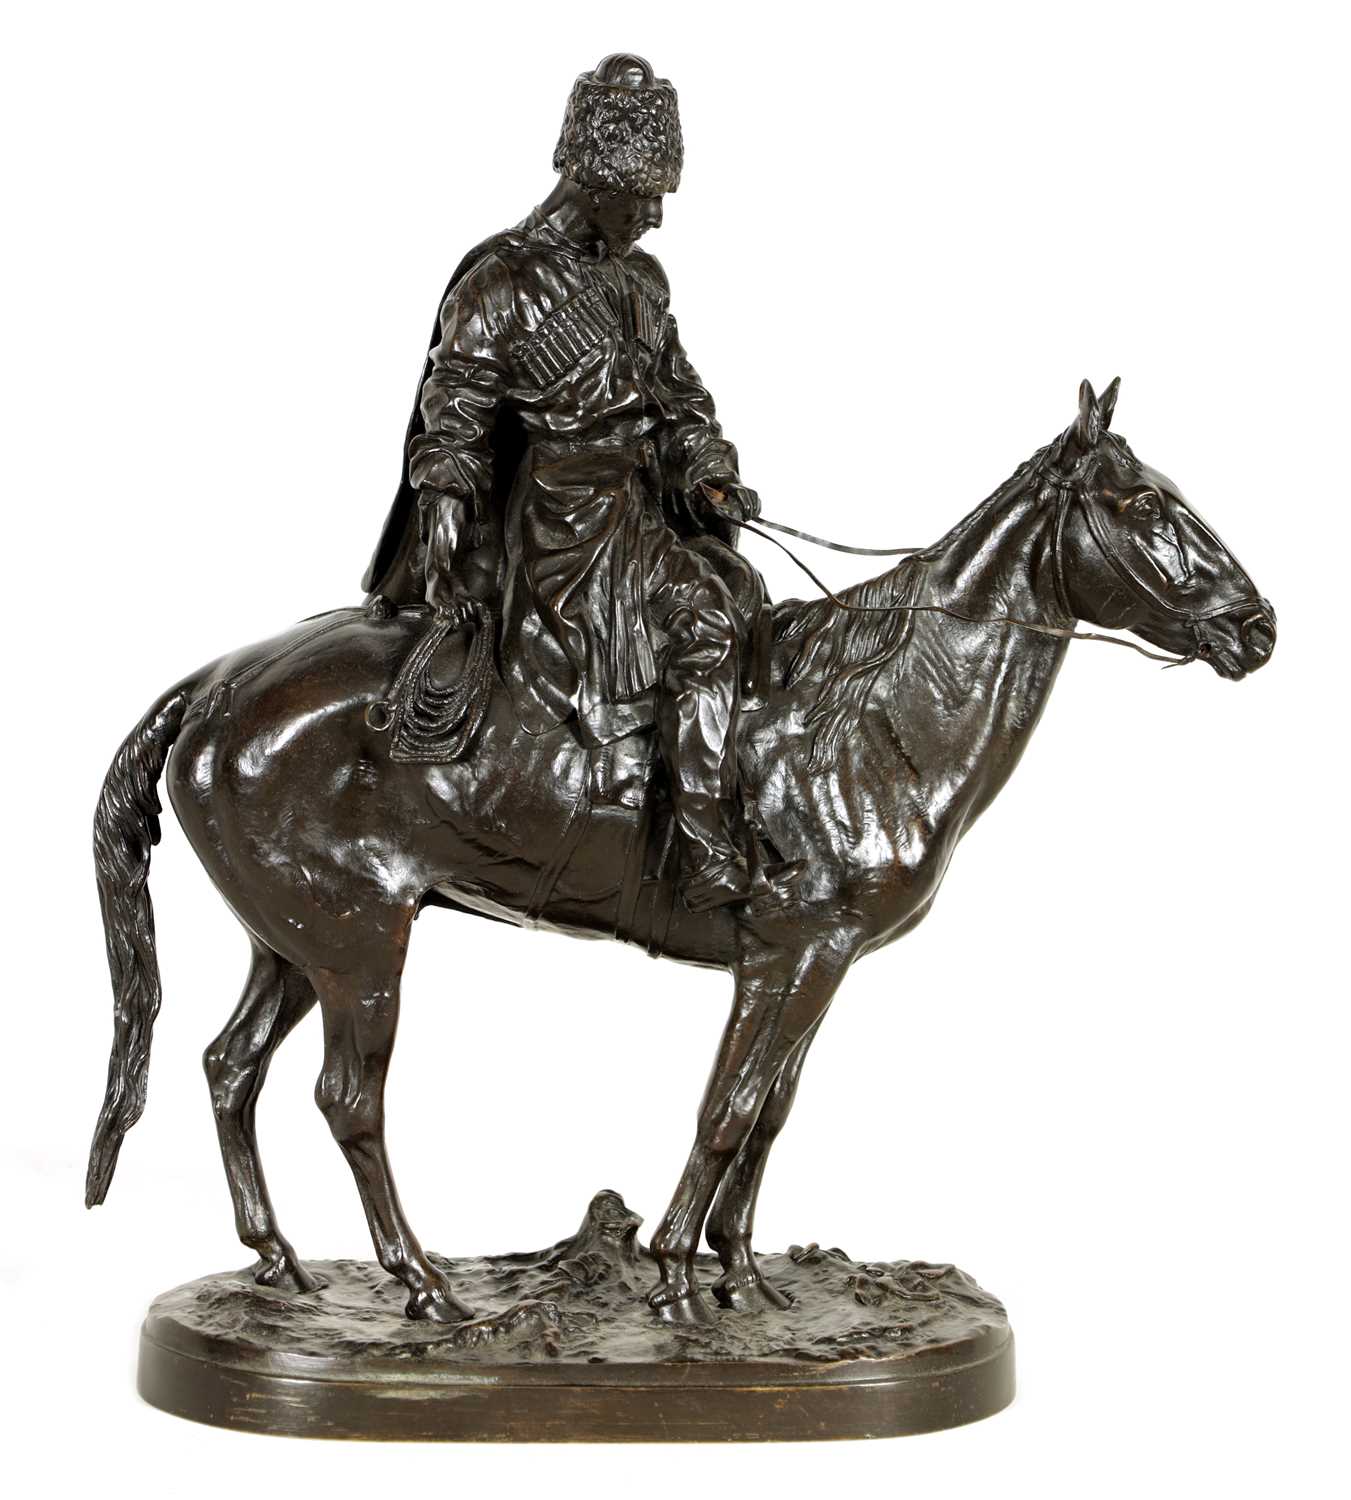 E. NAHCEPE. A LATE 19TH CENTURY RUSSIAN PATINATED BRONZE SCULPTURE